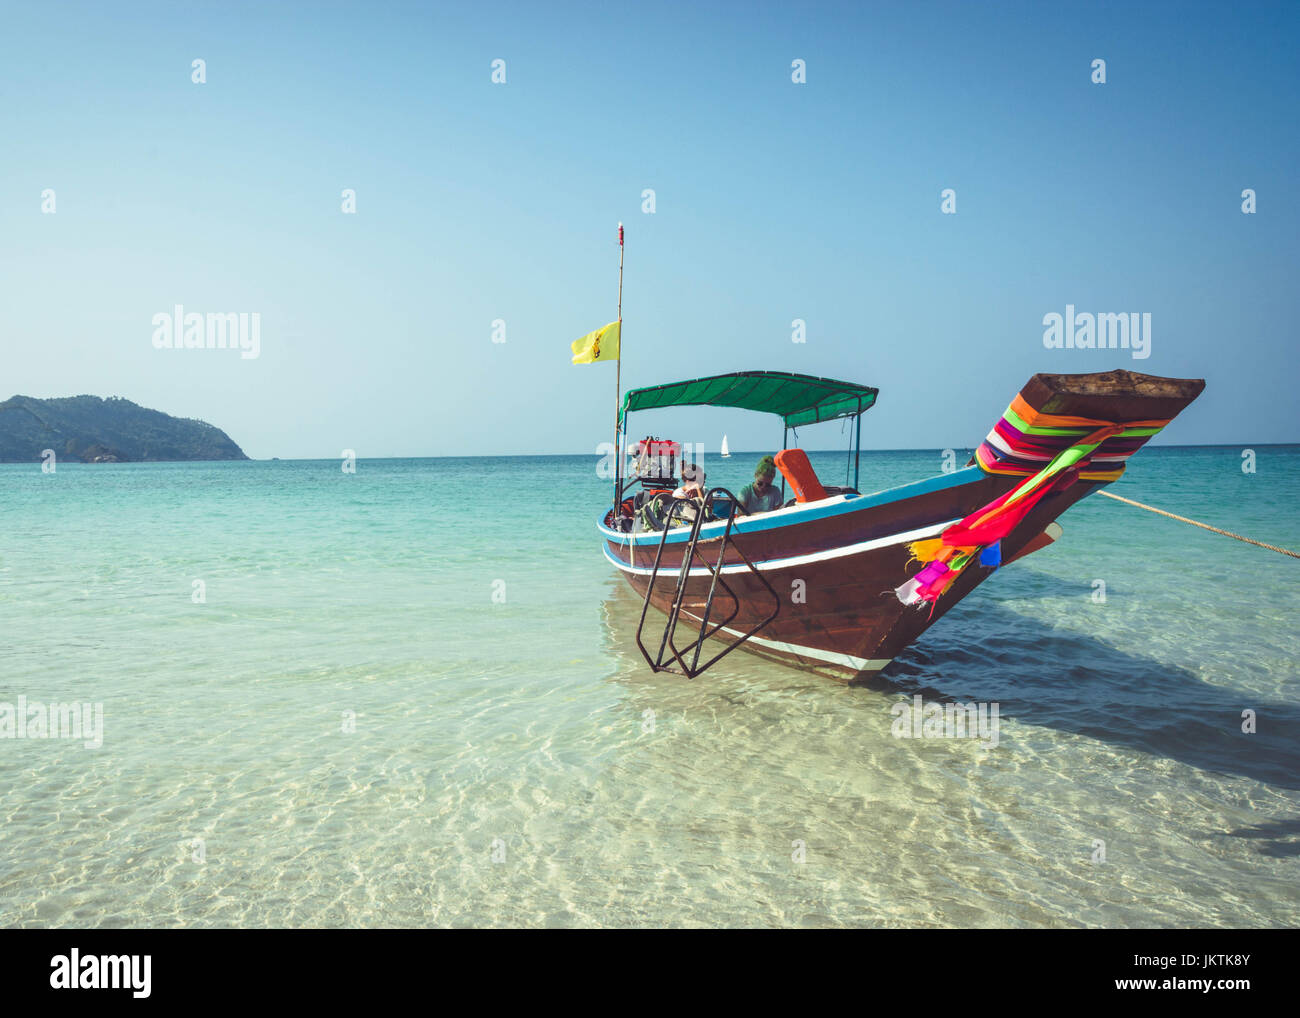 A boat is anchored at Bottle Beach, Koh Pha Ngan, Thailand. Southeast Asian travel, through the scenic islands of Thailand. Stock Photo